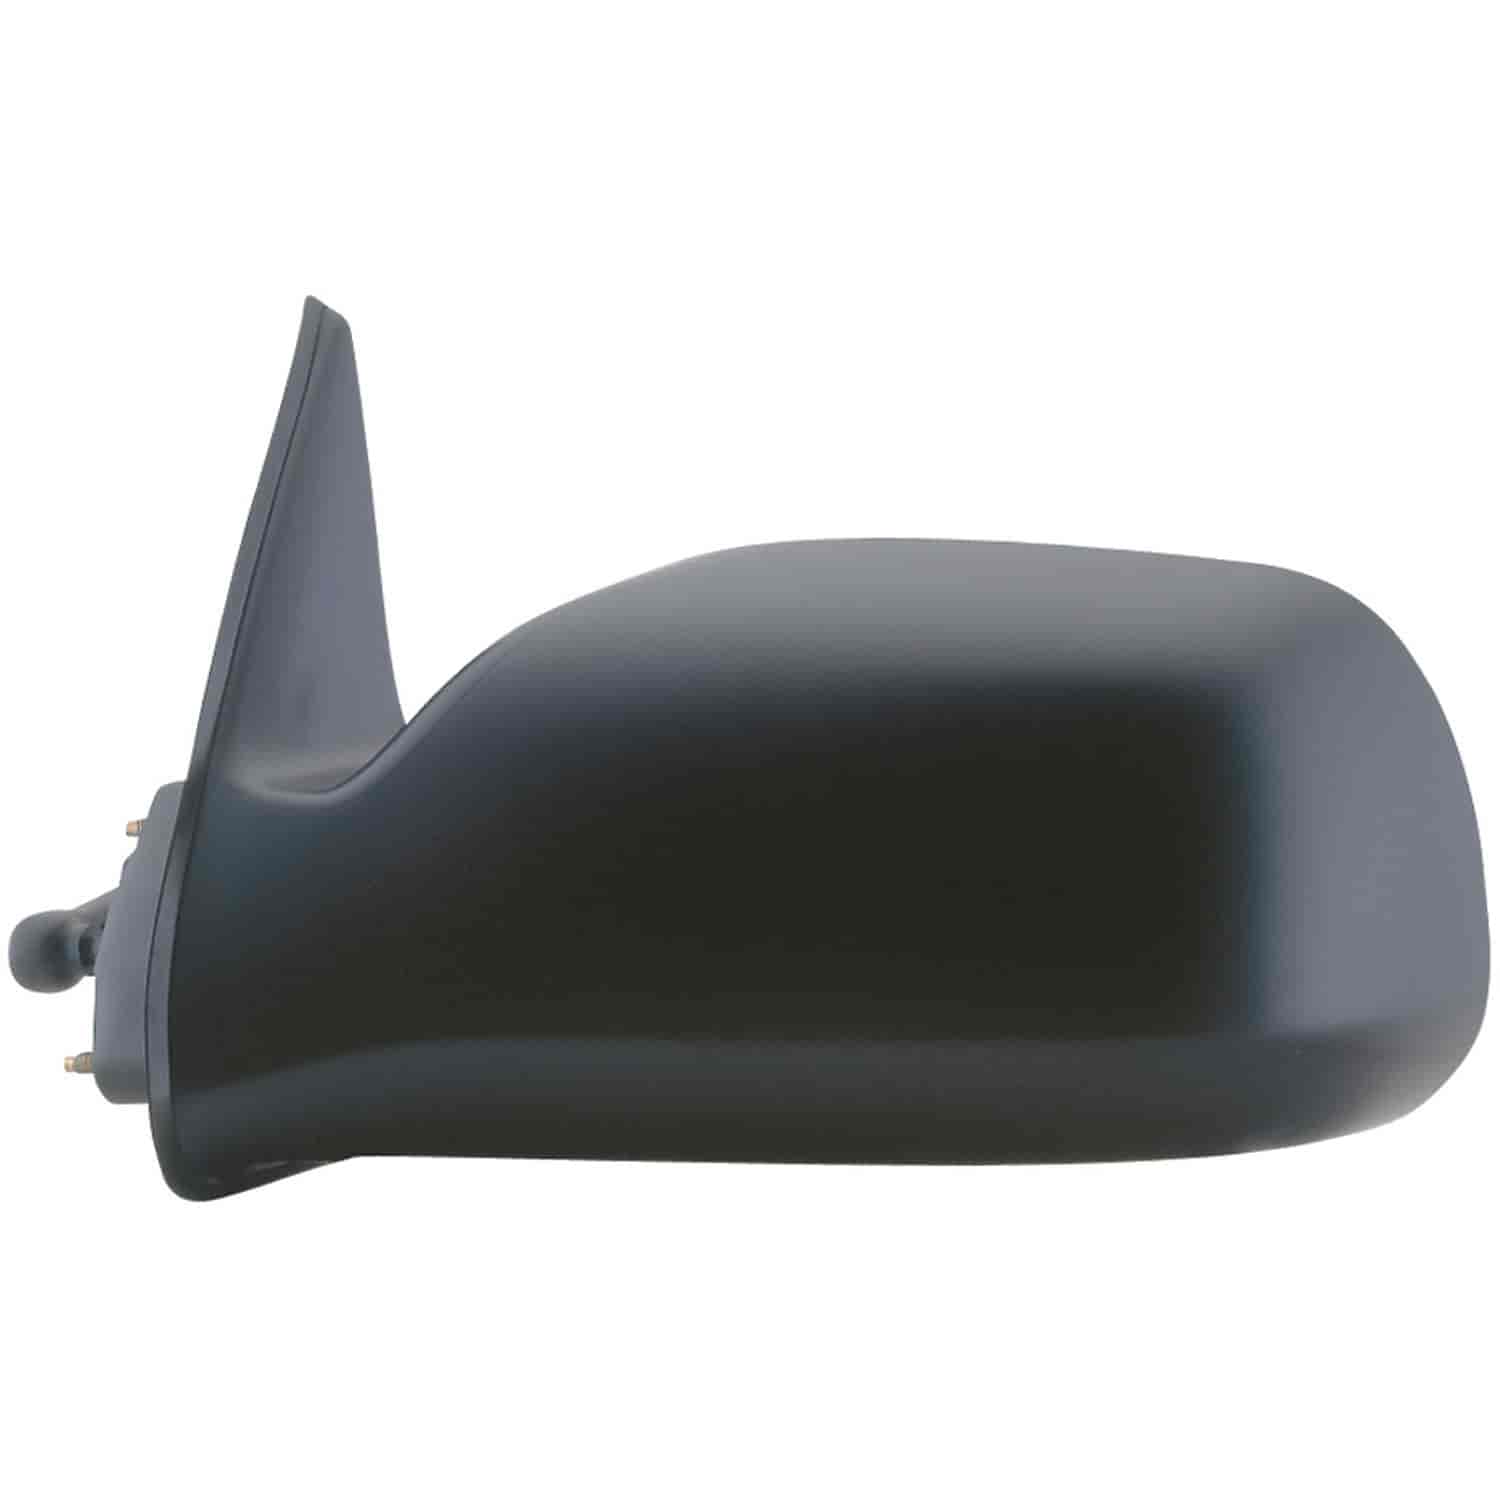 OEM Style Replacement mirror for 01-04 Toyota Tacoma driver side mirror tested to fit and function l